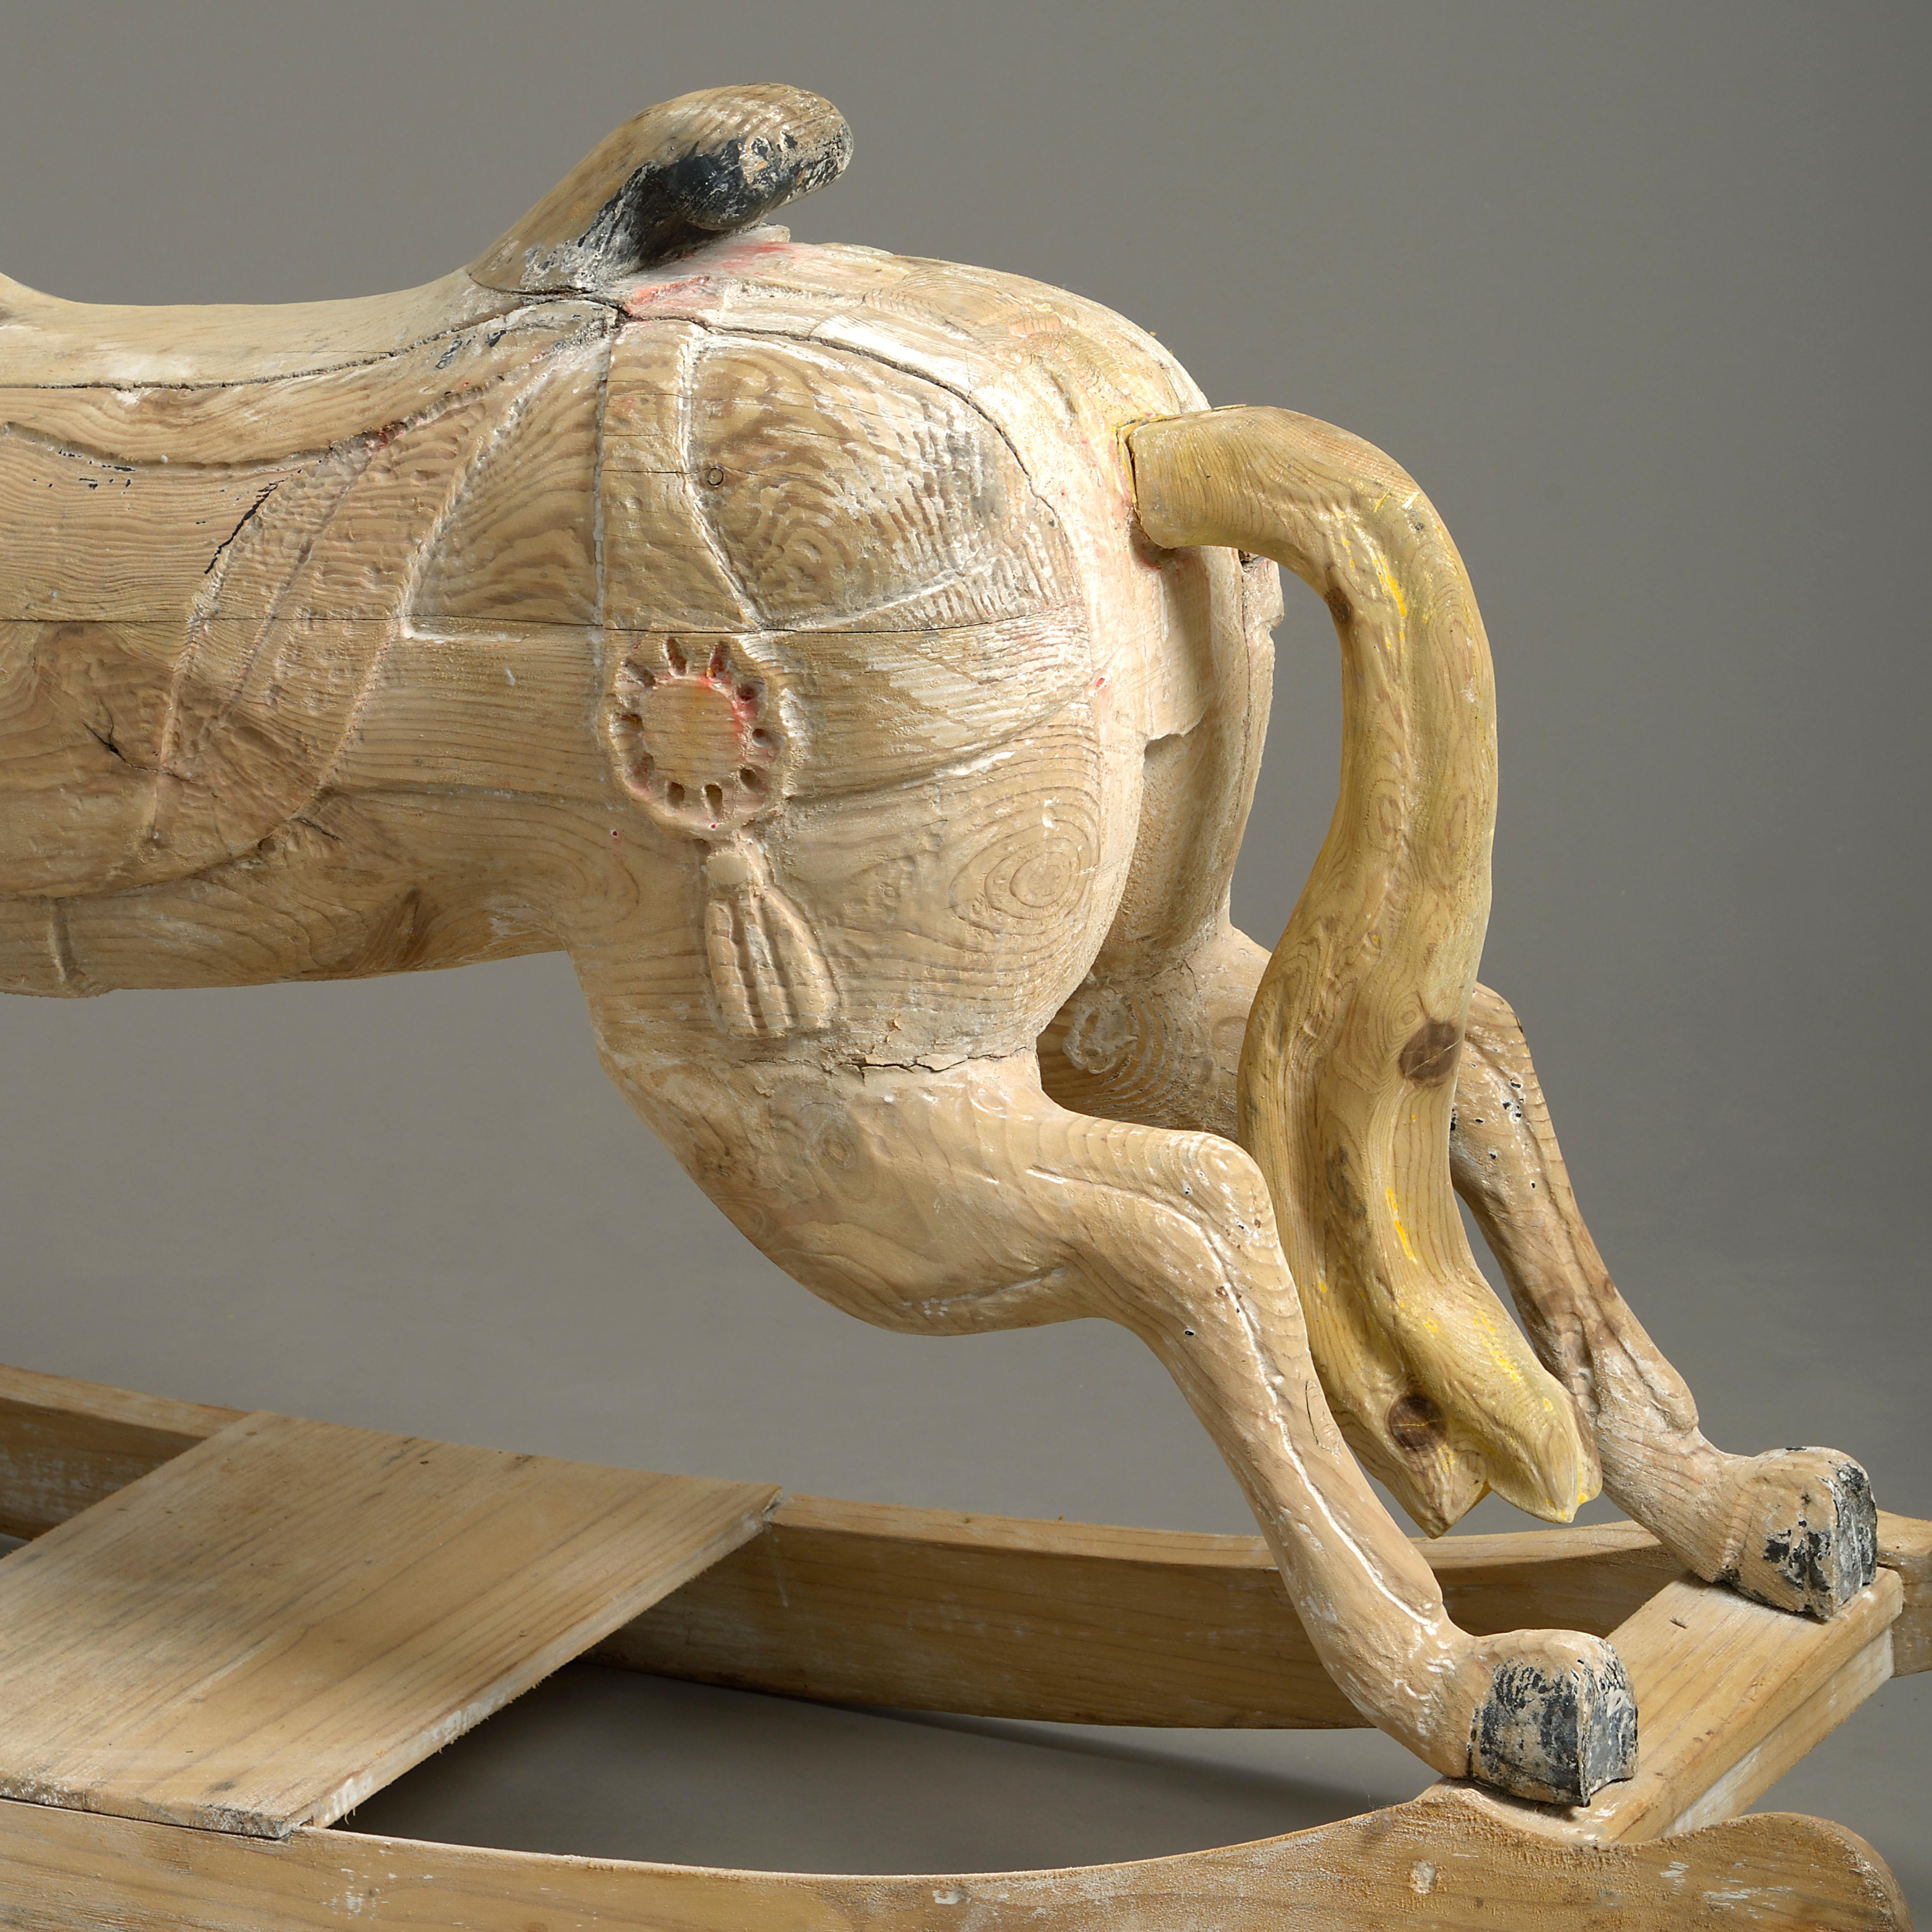 Hand-Carved 19th Century Victorian Carved Wooden Carousel Rocking Horse